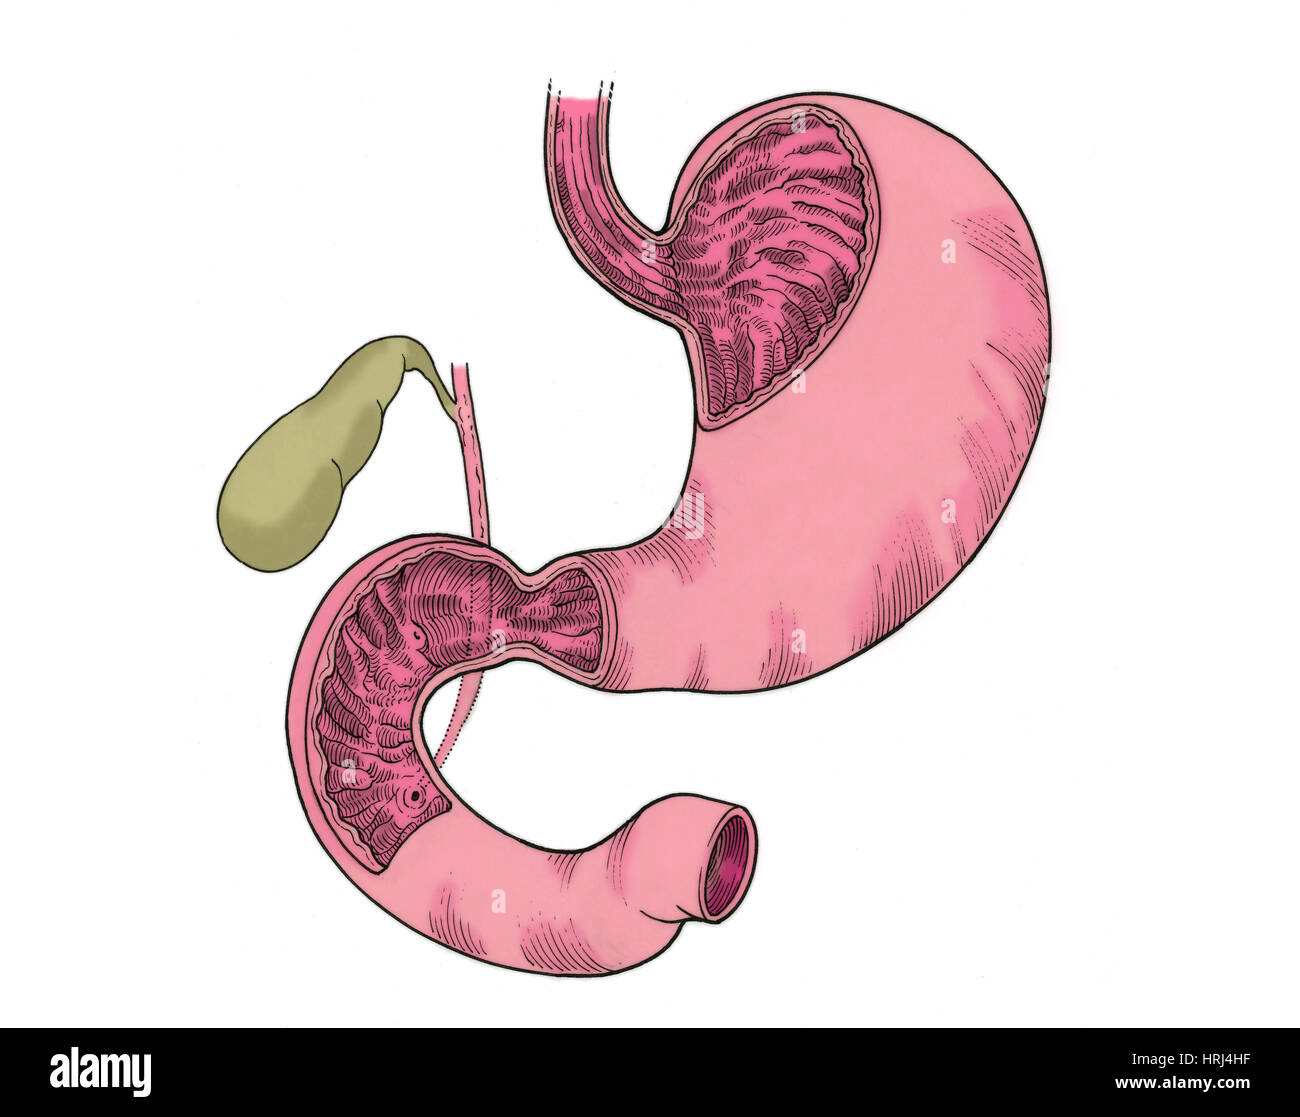 Illustration of Stomach and Duodenum Stock Photo